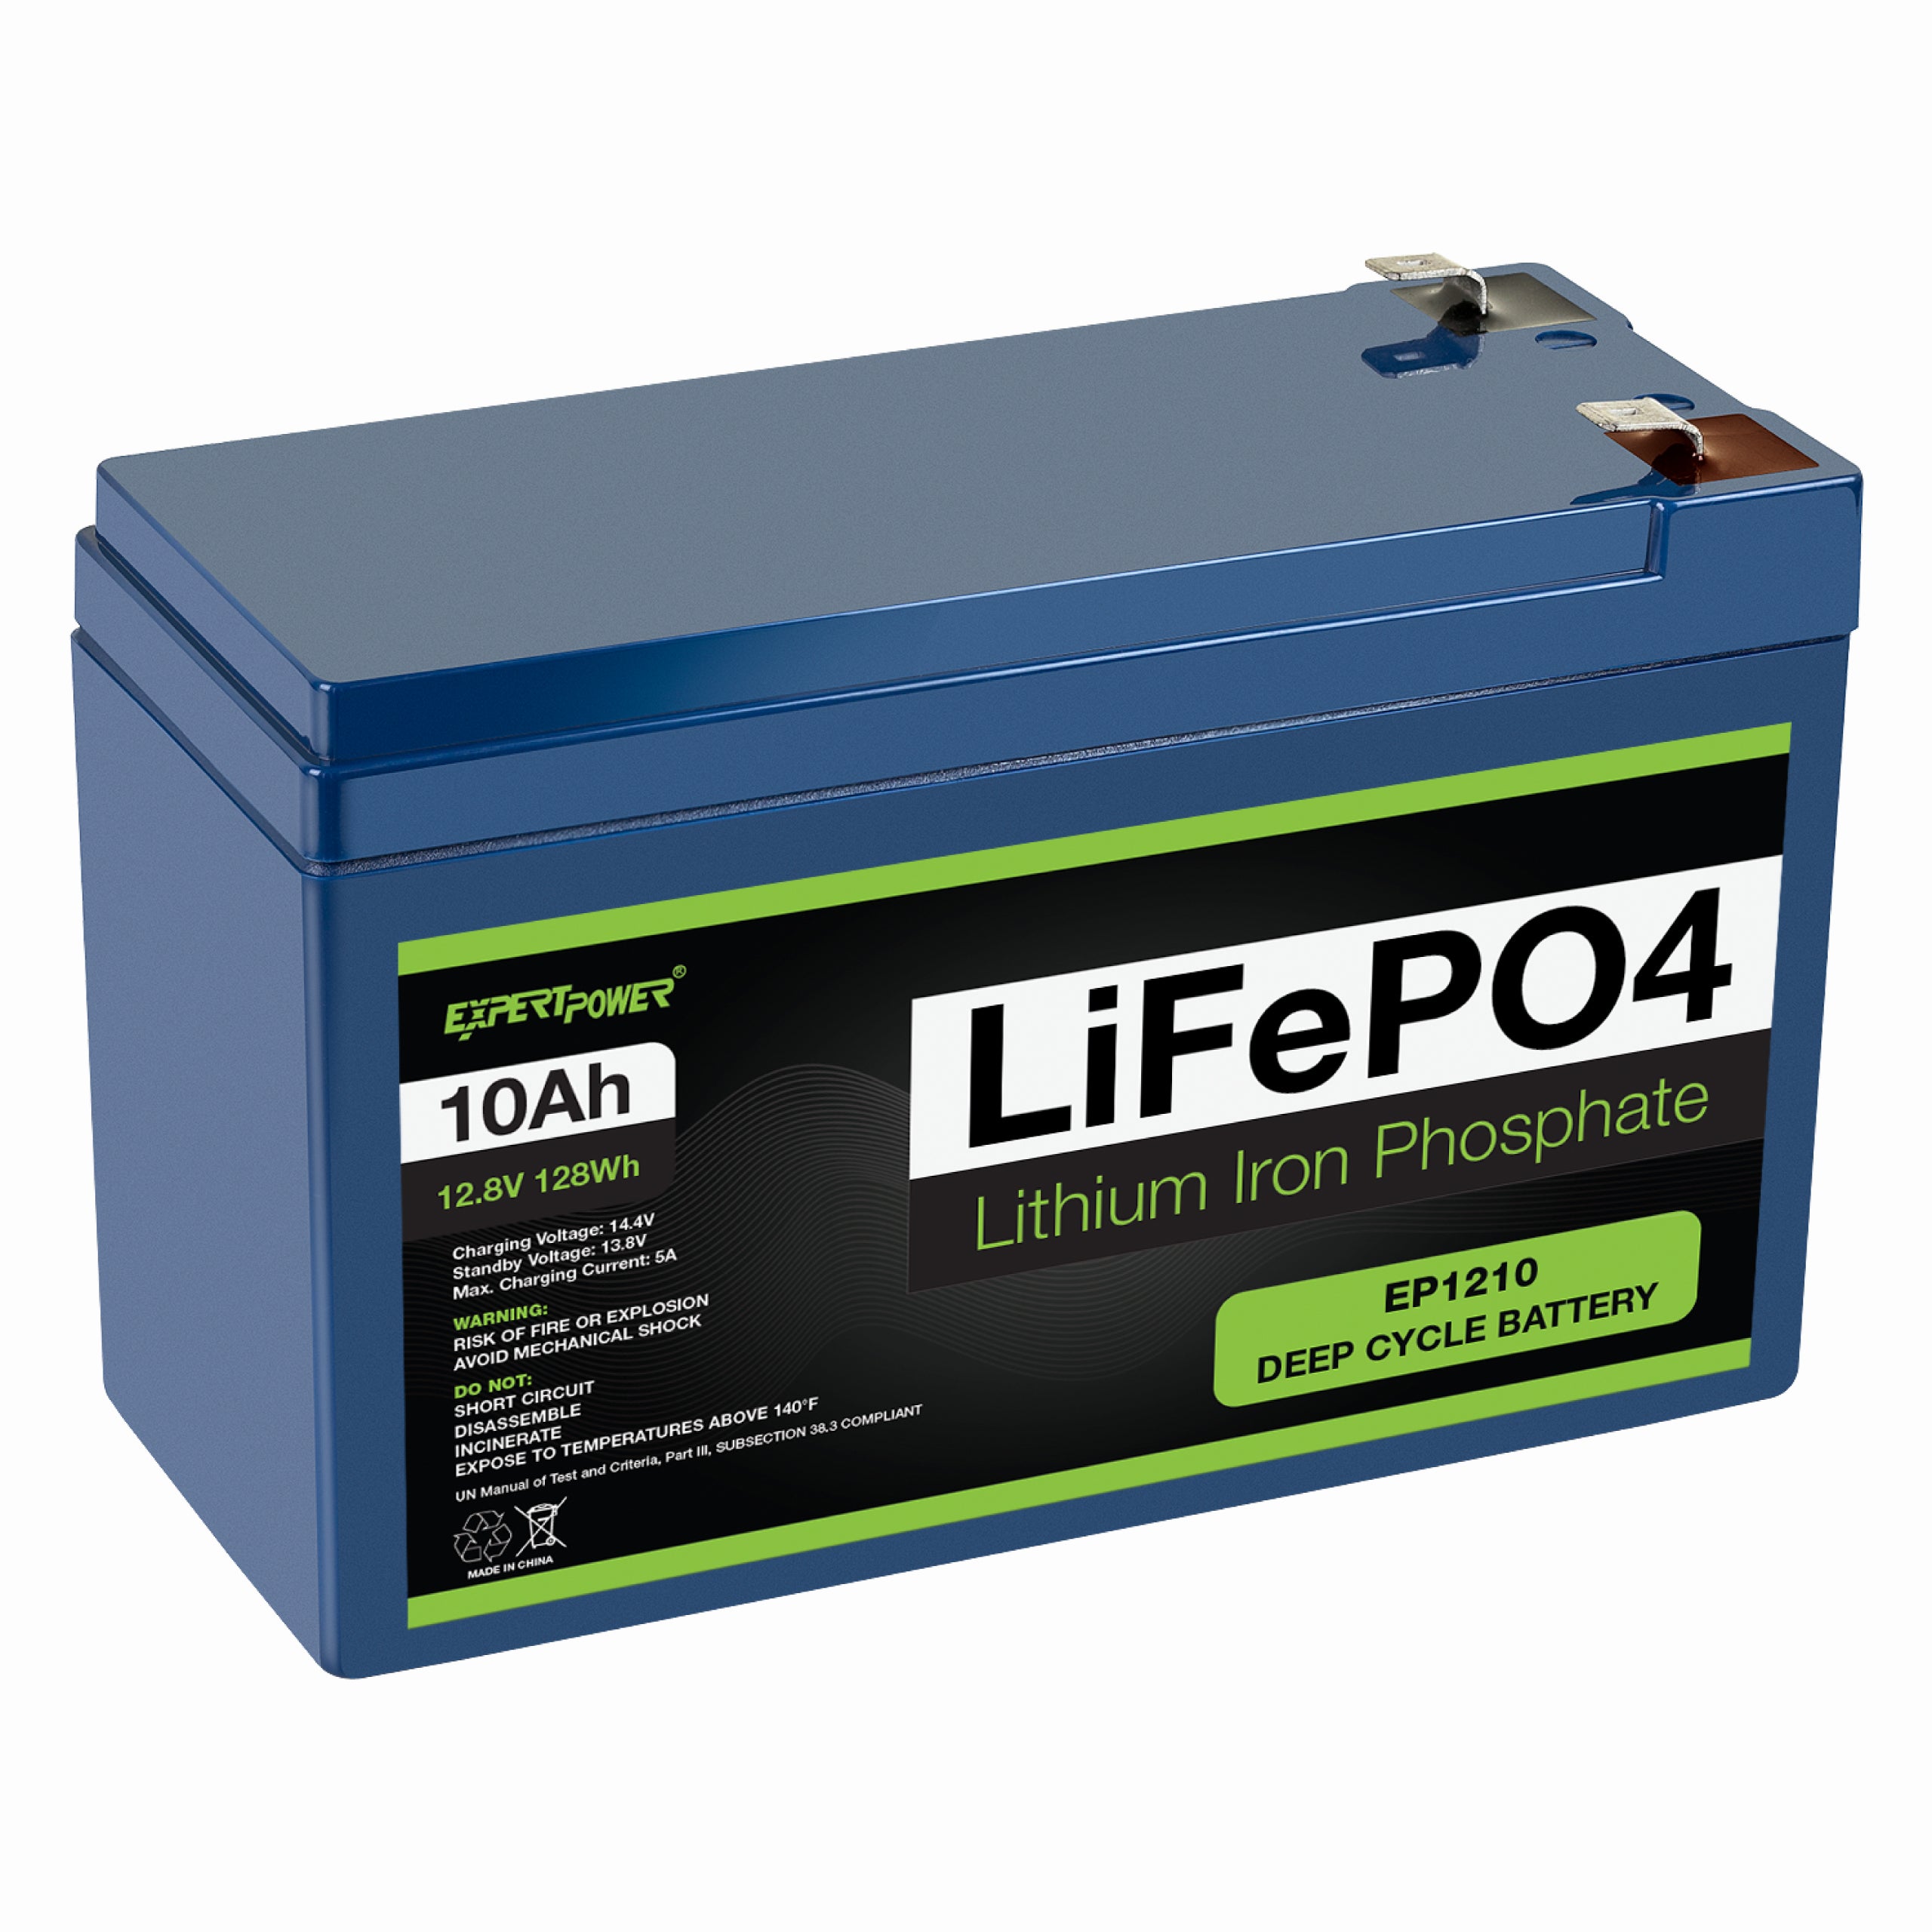 XZNY 12V 12Ah LiFePO4 Lithium Battery, 5000+ Cycles 12V Deep Cycle LiFePO4  Battery Built-in 10A BMS, Suitable for Fish Finder, LED Light, Security